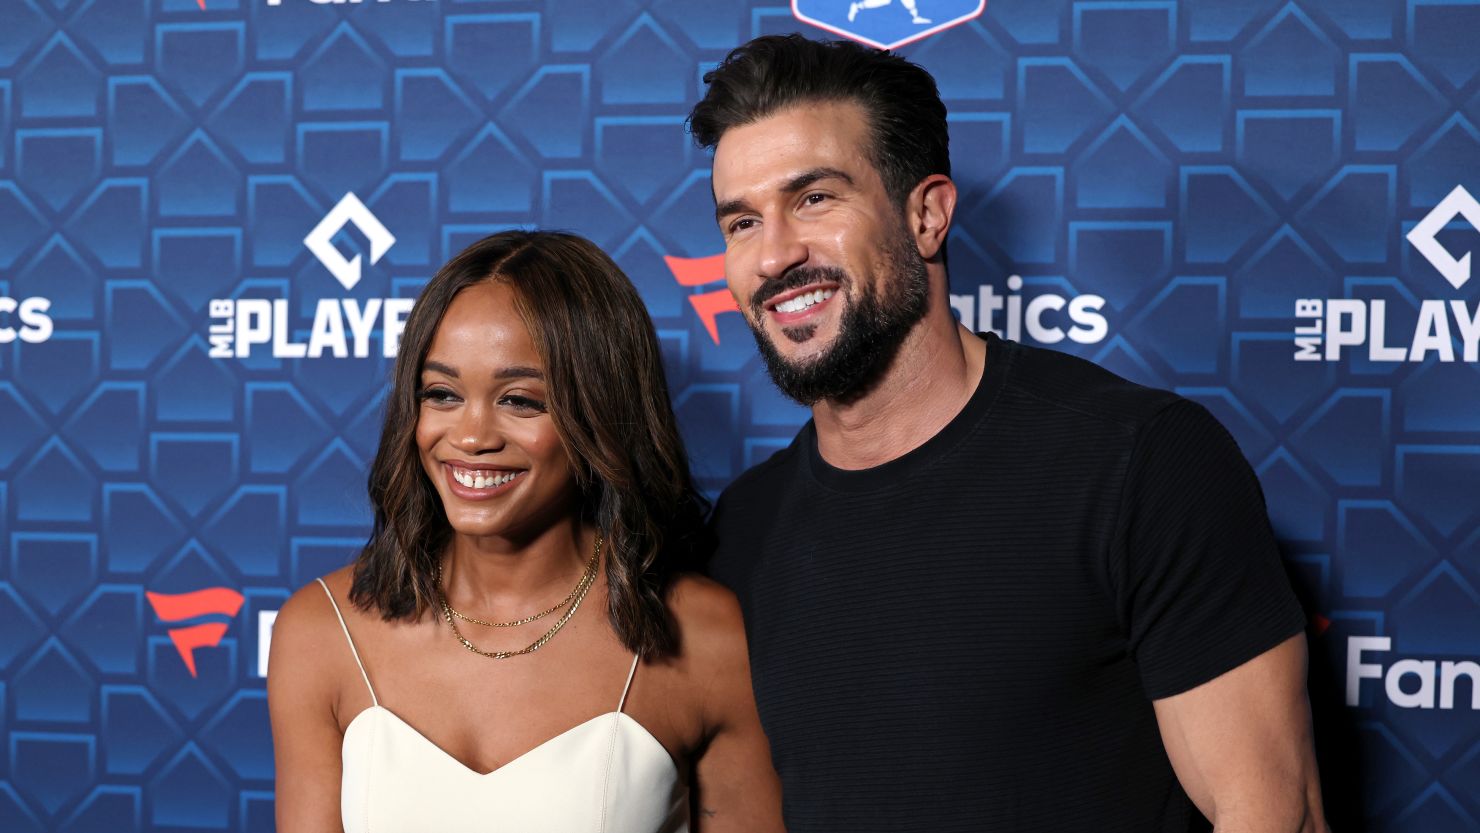 Rachel Lindsay and Bryan Abasolo attend the "Players Party" co-hosted by Michael Rubin, MLBPA and Fanatics at City Market Social House on July 18, 2022 in Los Angeles, California.